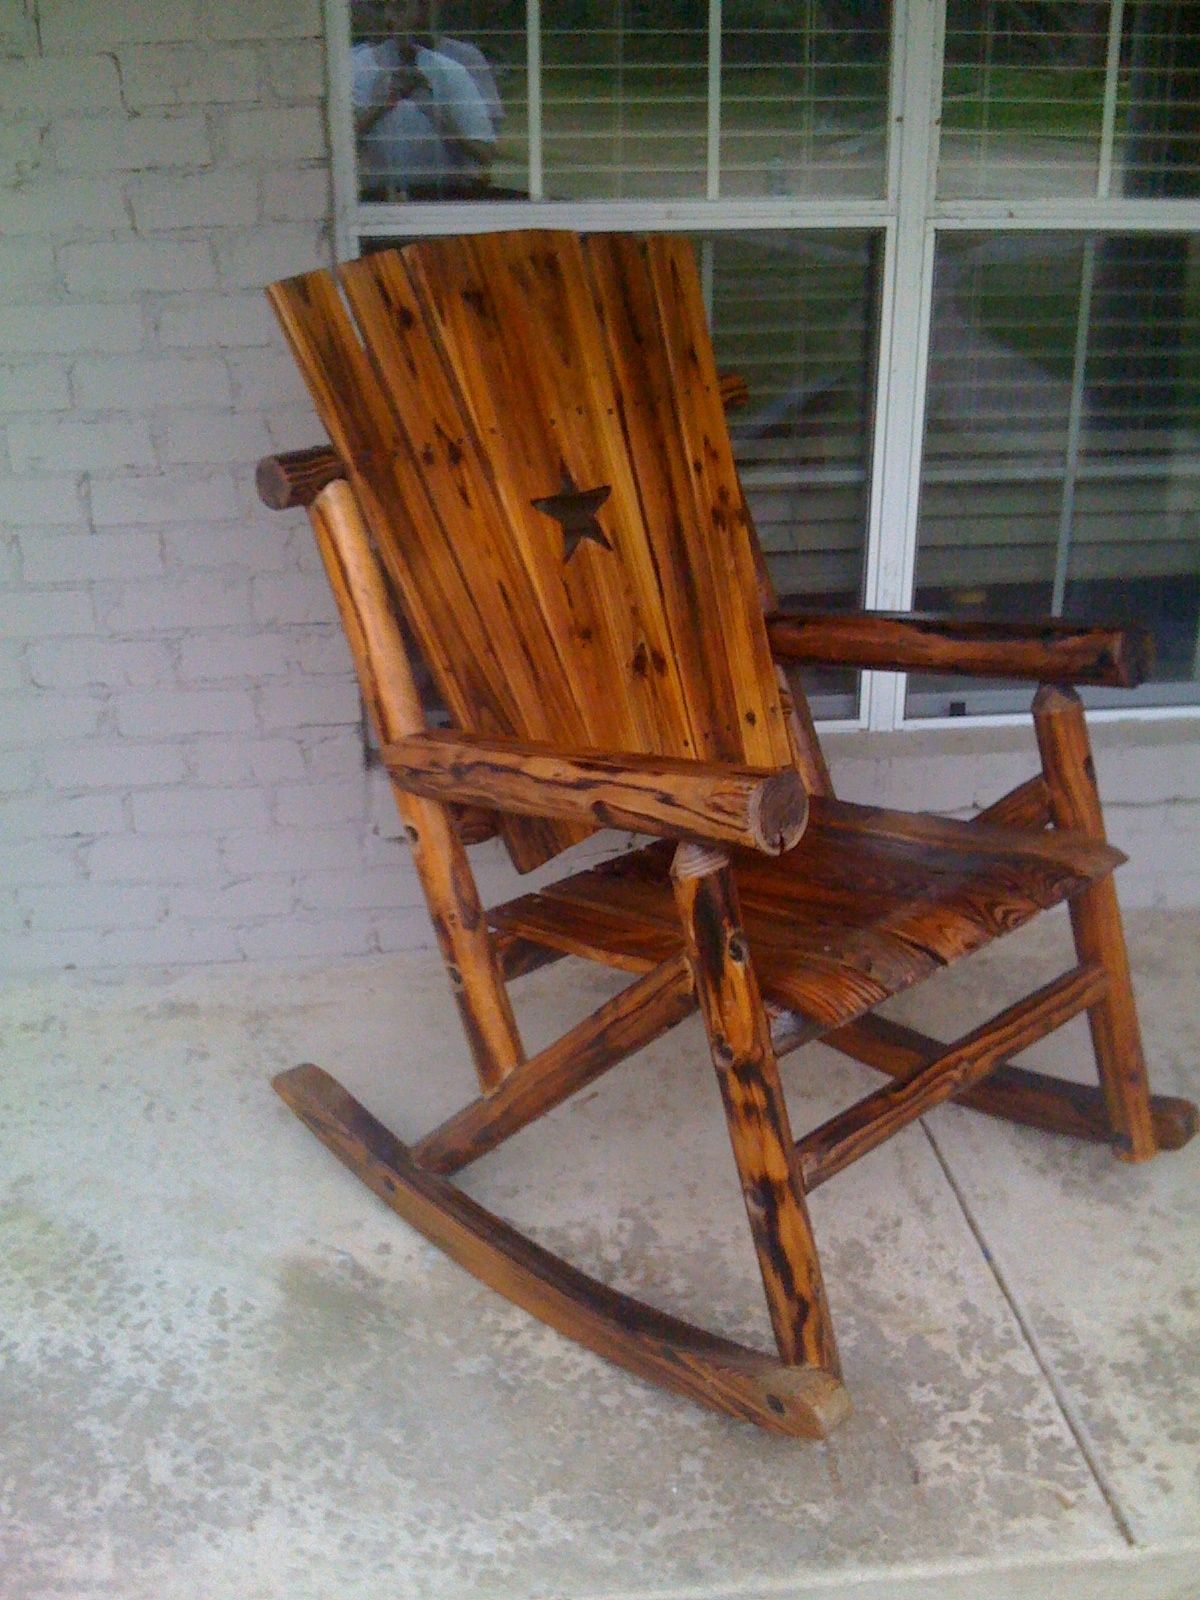 Outdoor Wooden Rocking Chairs Rustic : Pleasure Outdoor Wooden With Most Recent Rocking Chairs For Outdoors (View 9 of 15)